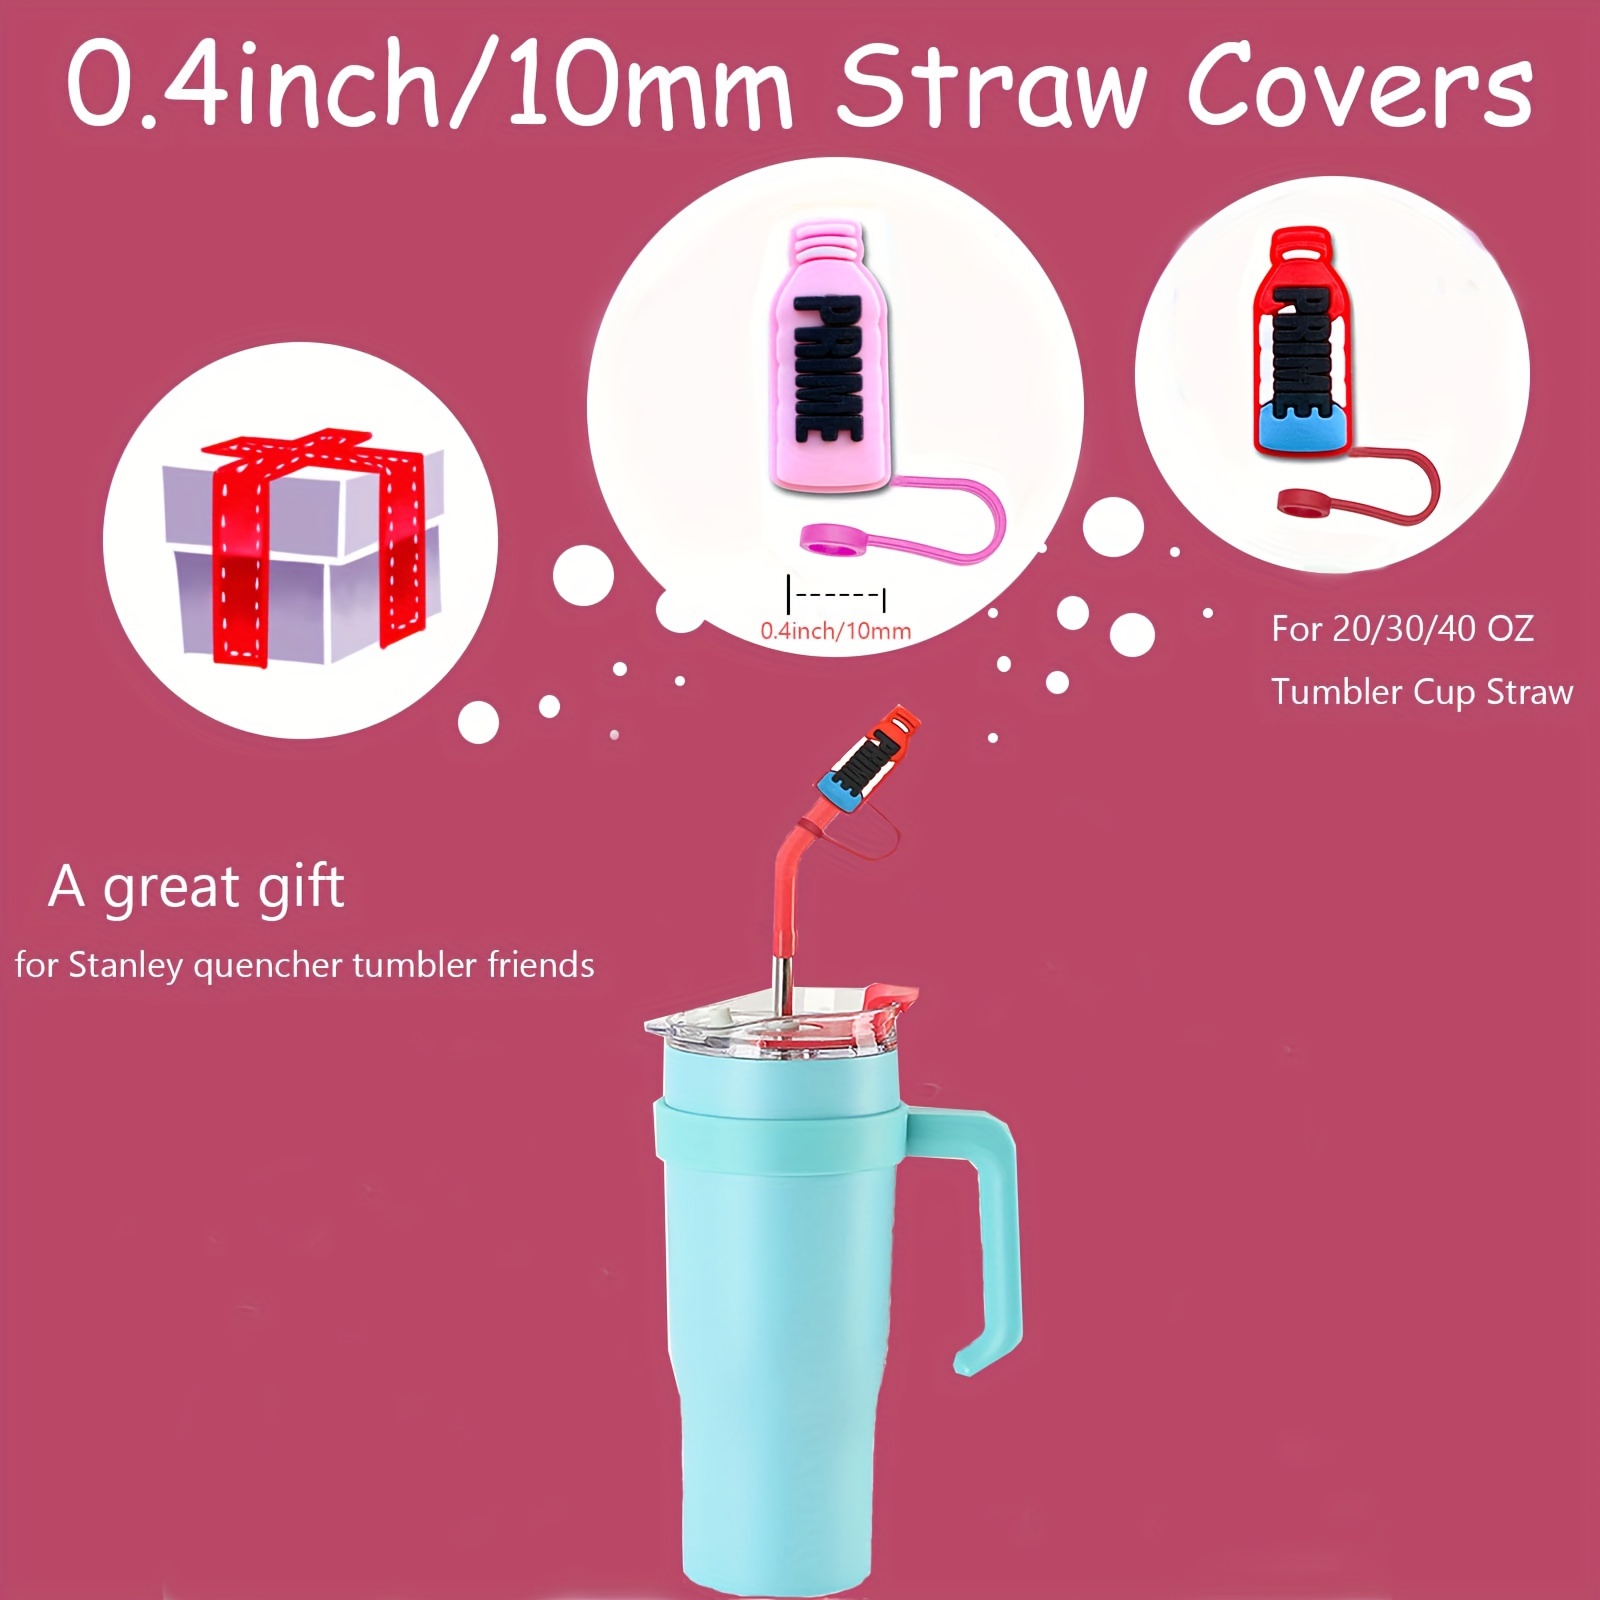 GAISHION 3 pcs Pink Straw Covers Cap Toppers Tips Compatible with Stanley  40/30 oz Tumbler Cups,Reusable Cute Silicone Straw Lids Protectors for 0.4  in/10mm Stanley Cups Straws Accessories price in Saudi Arabia